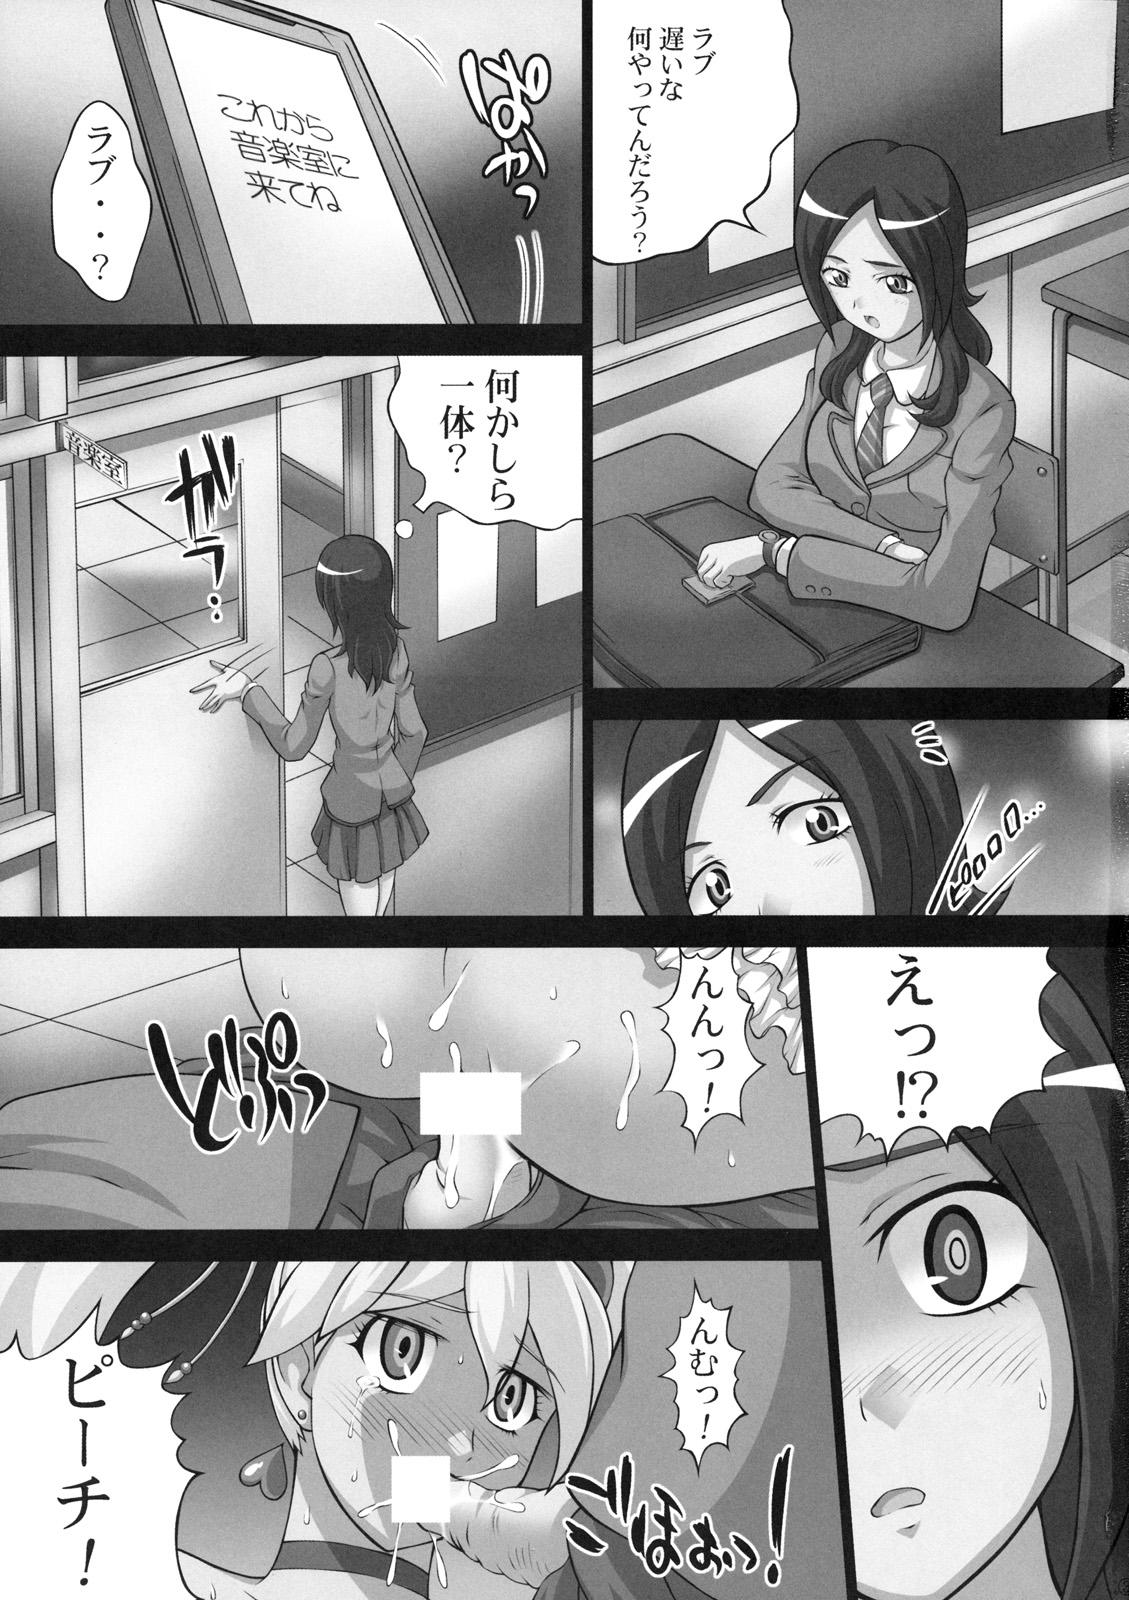 Gaping Kaikan Get Dayo 2 - Fresh precure French Porn - Page 4